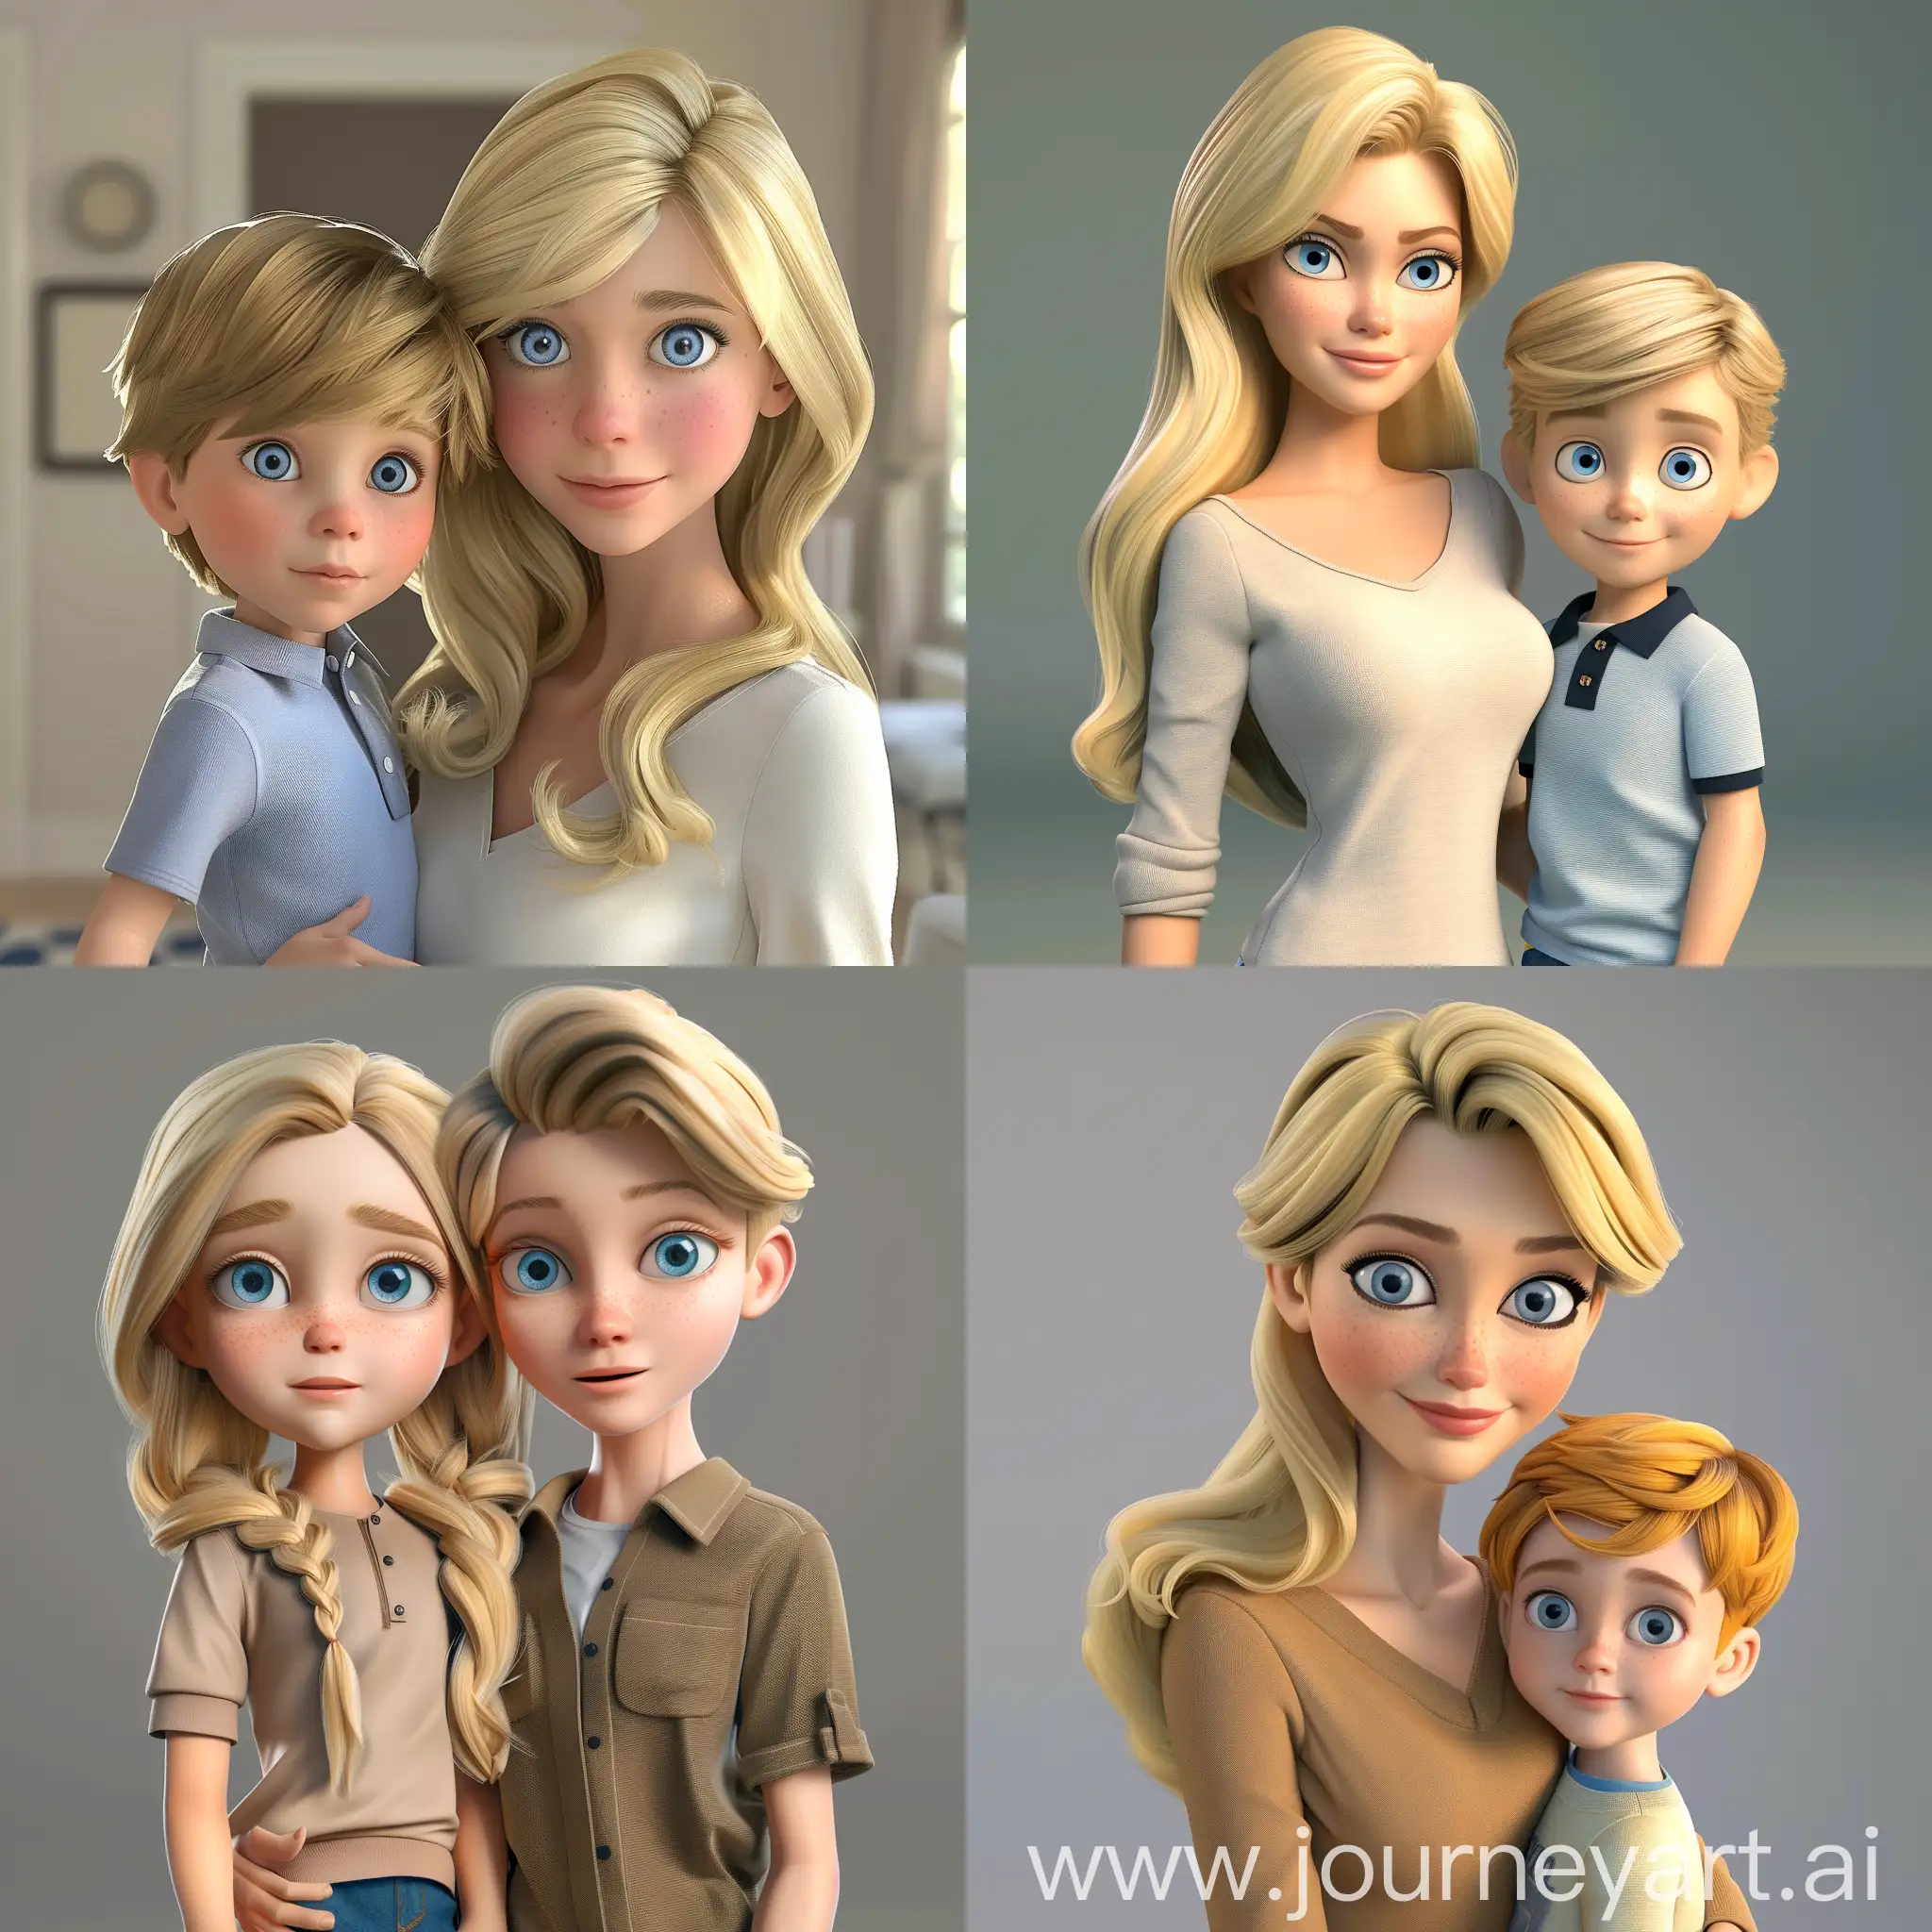 Russian-Mother-and-Son-3D-Pixar-Portrait-of-a-Blond-Duo-with-Blue-Eyes